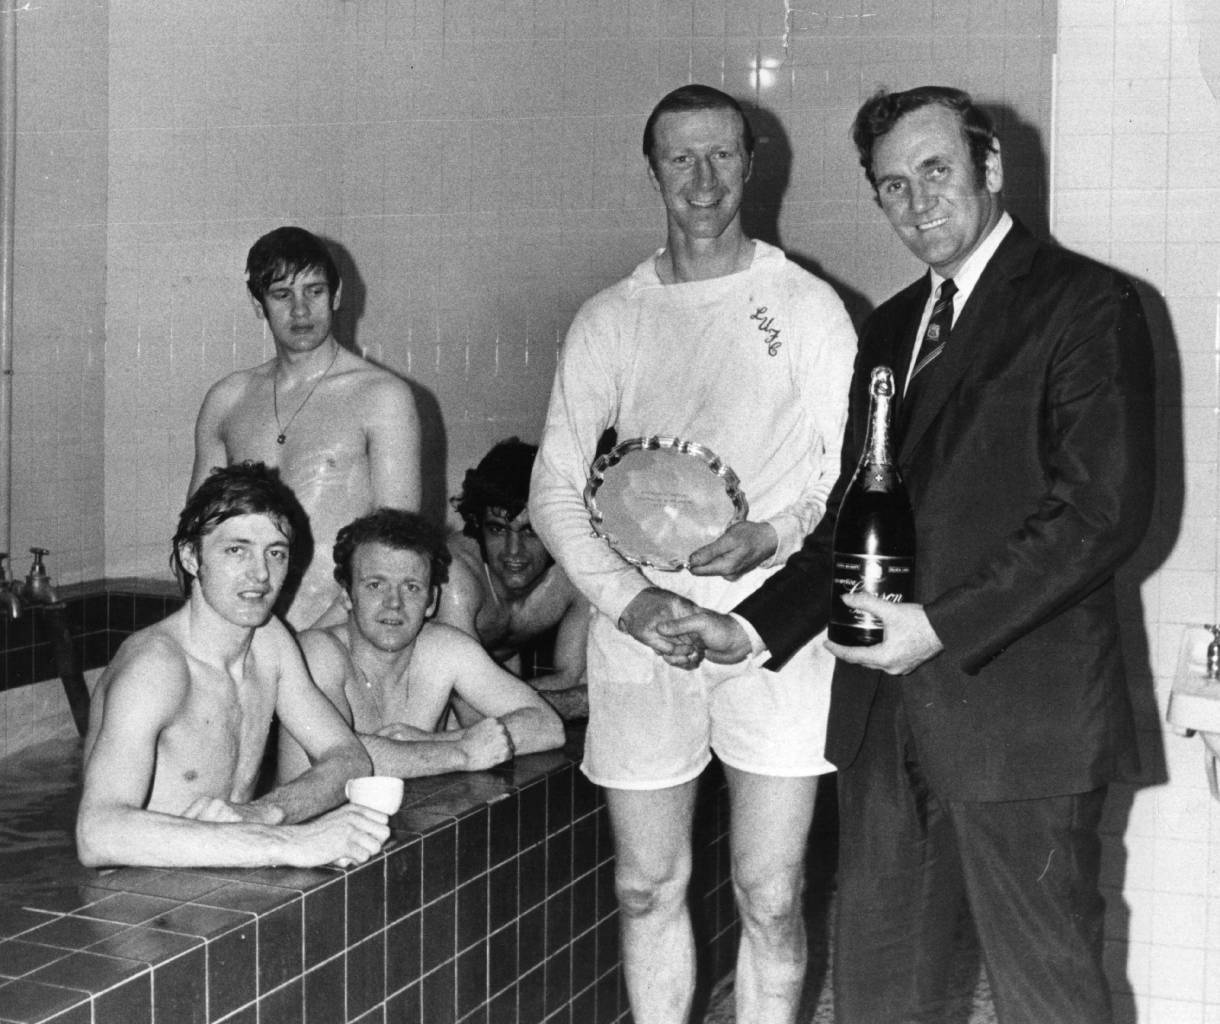 8th April 1972:  Leeds United manager Don Revie presents Jack Charlton with a bottle of champagne and the Footballer of the Month trophy in the changing room after a match. In the bath behind them are fellow Leeds players Clark, Billy Bremner  (1942 -1997), Bates, and Gary Sprake (standing).  (Photo by E. Milsom/Evening Standard/Getty Images)